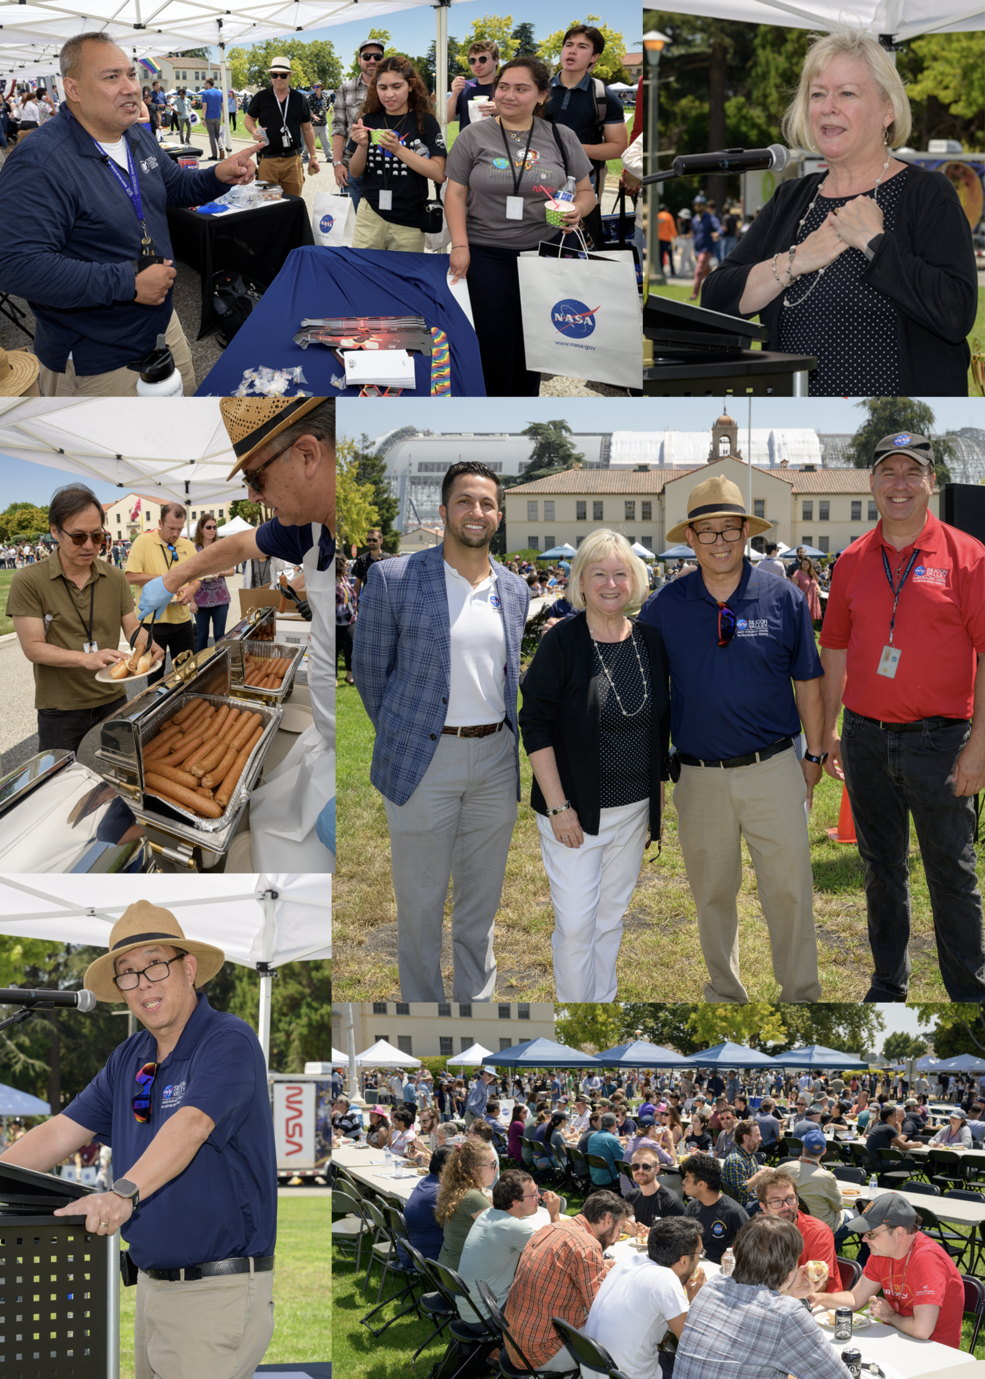 A second collage of pictures from the Ames summer picnic